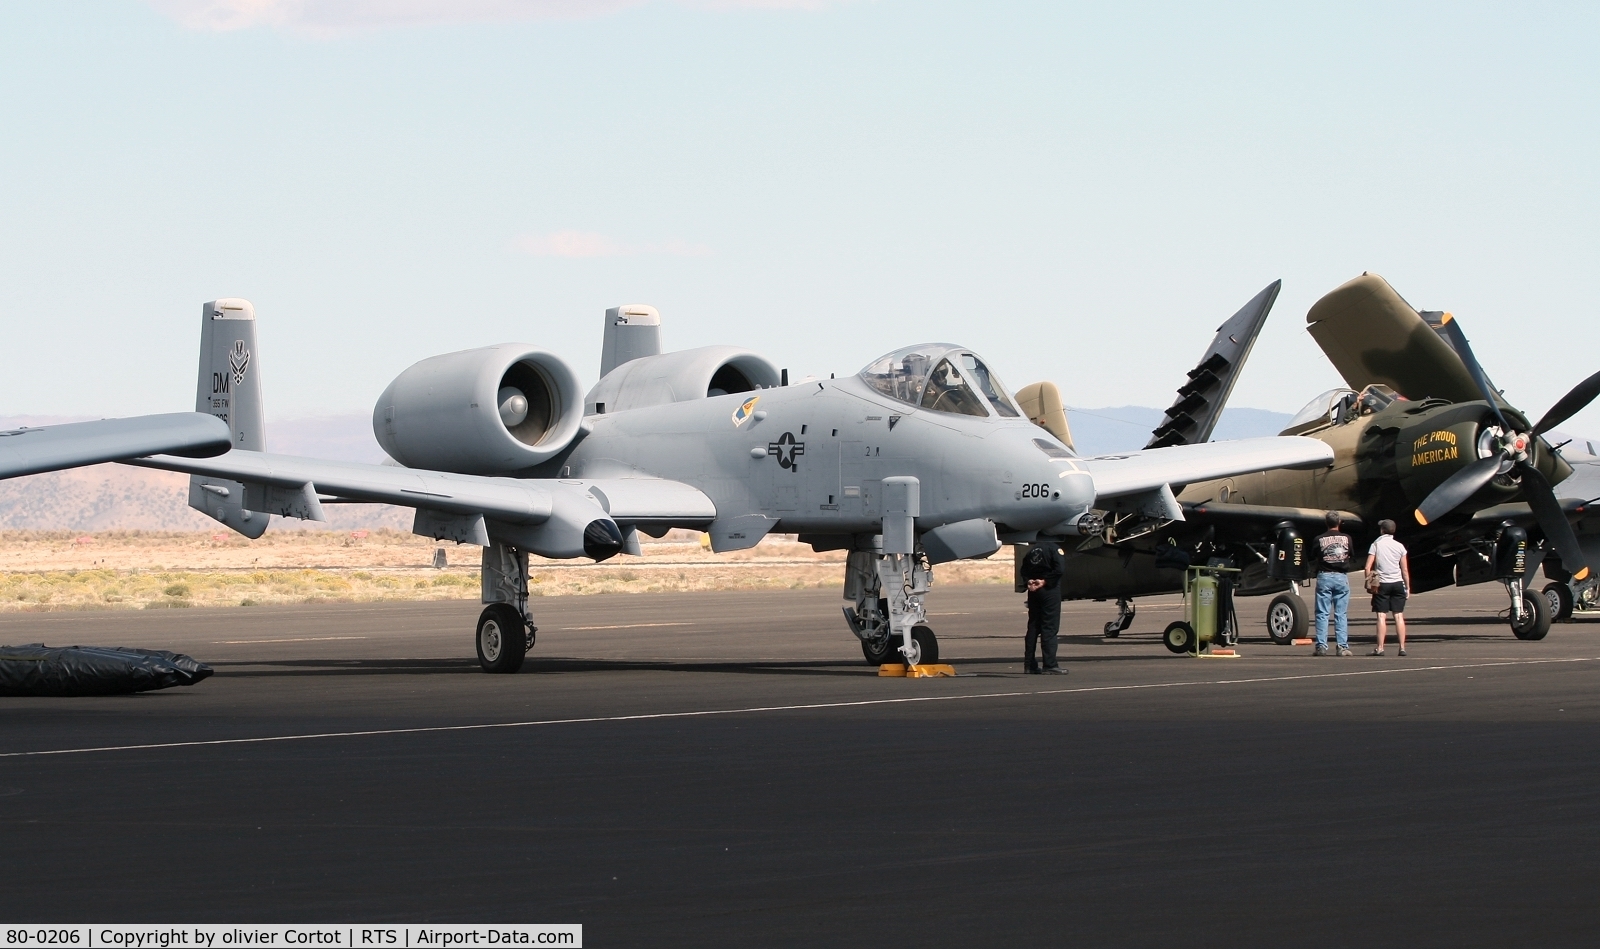 80-0206, 1980 Fairchild Republic A-10A Thunderbolt II C/N A10-0556, about to perform during the air races week-end, Reno 2007